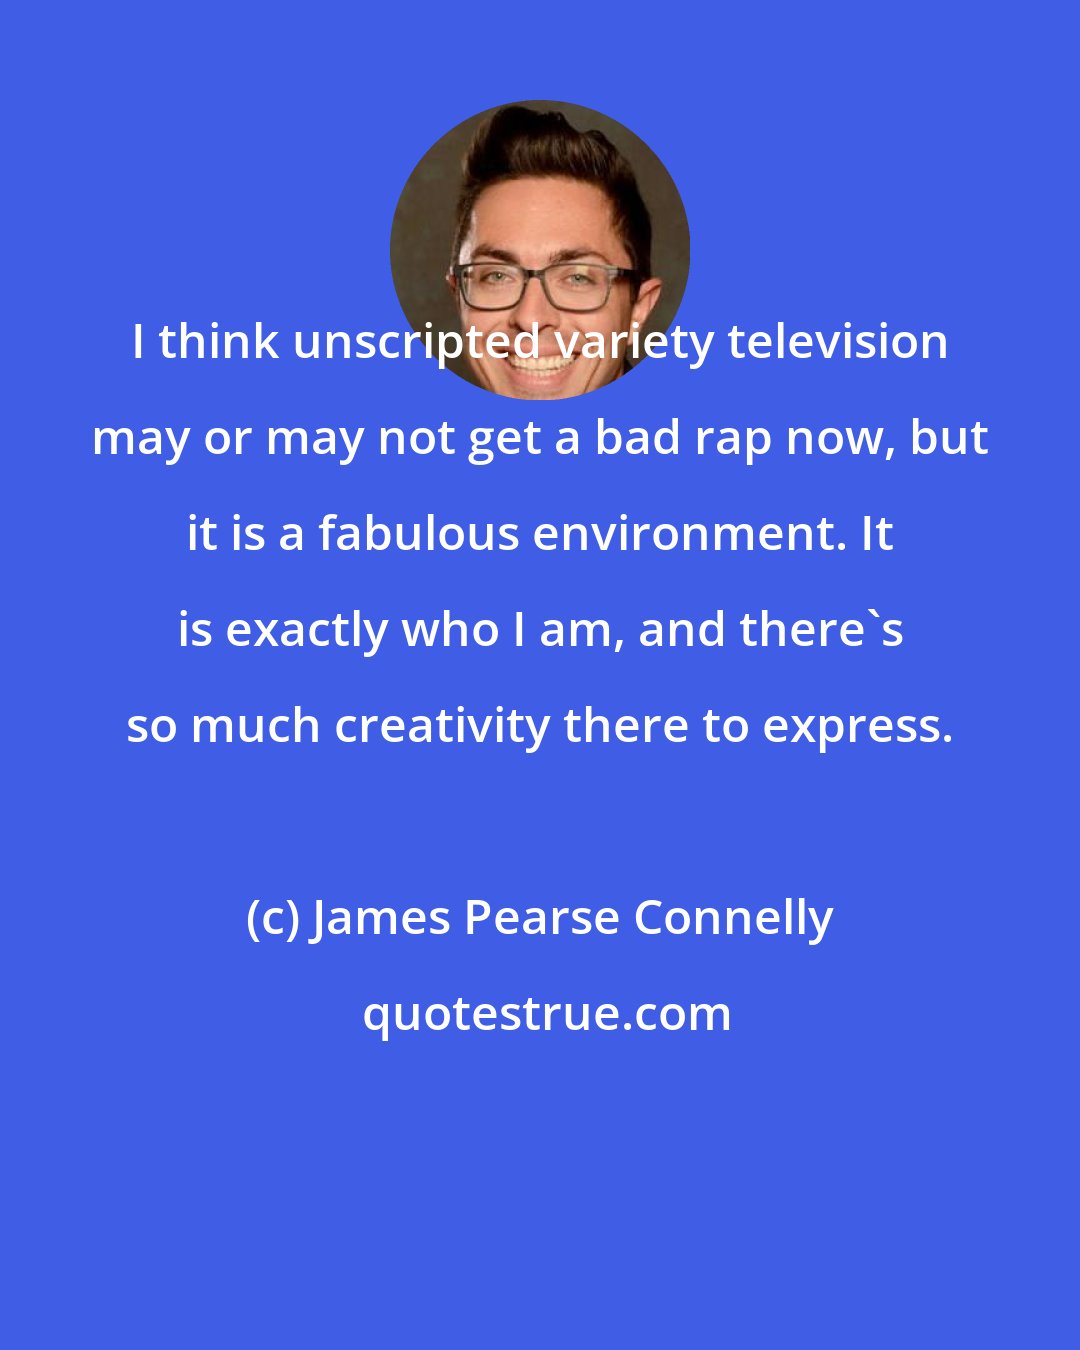 James Pearse Connelly: I think unscripted variety television may or may not get a bad rap now, but it is a fabulous environment. It is exactly who I am, and there's so much creativity there to express.